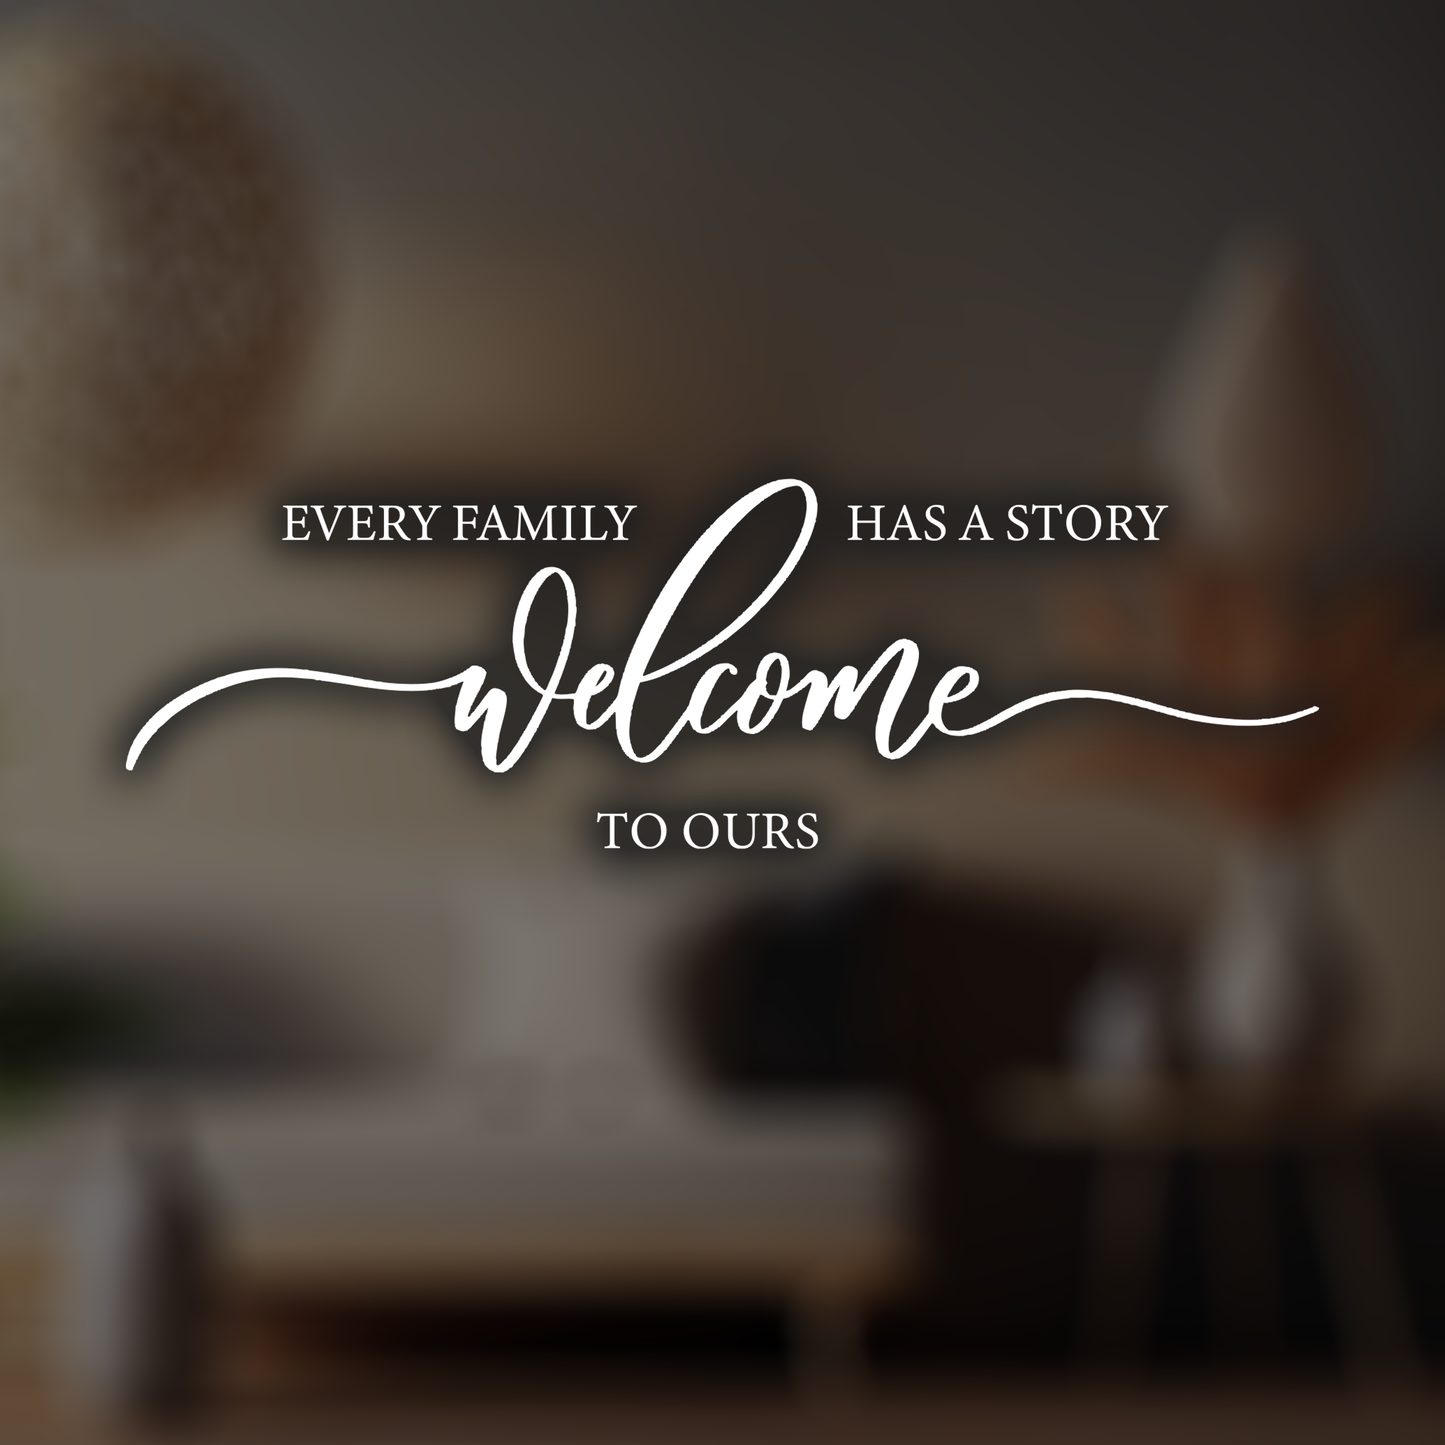 Family Story Wall Sticker Decal